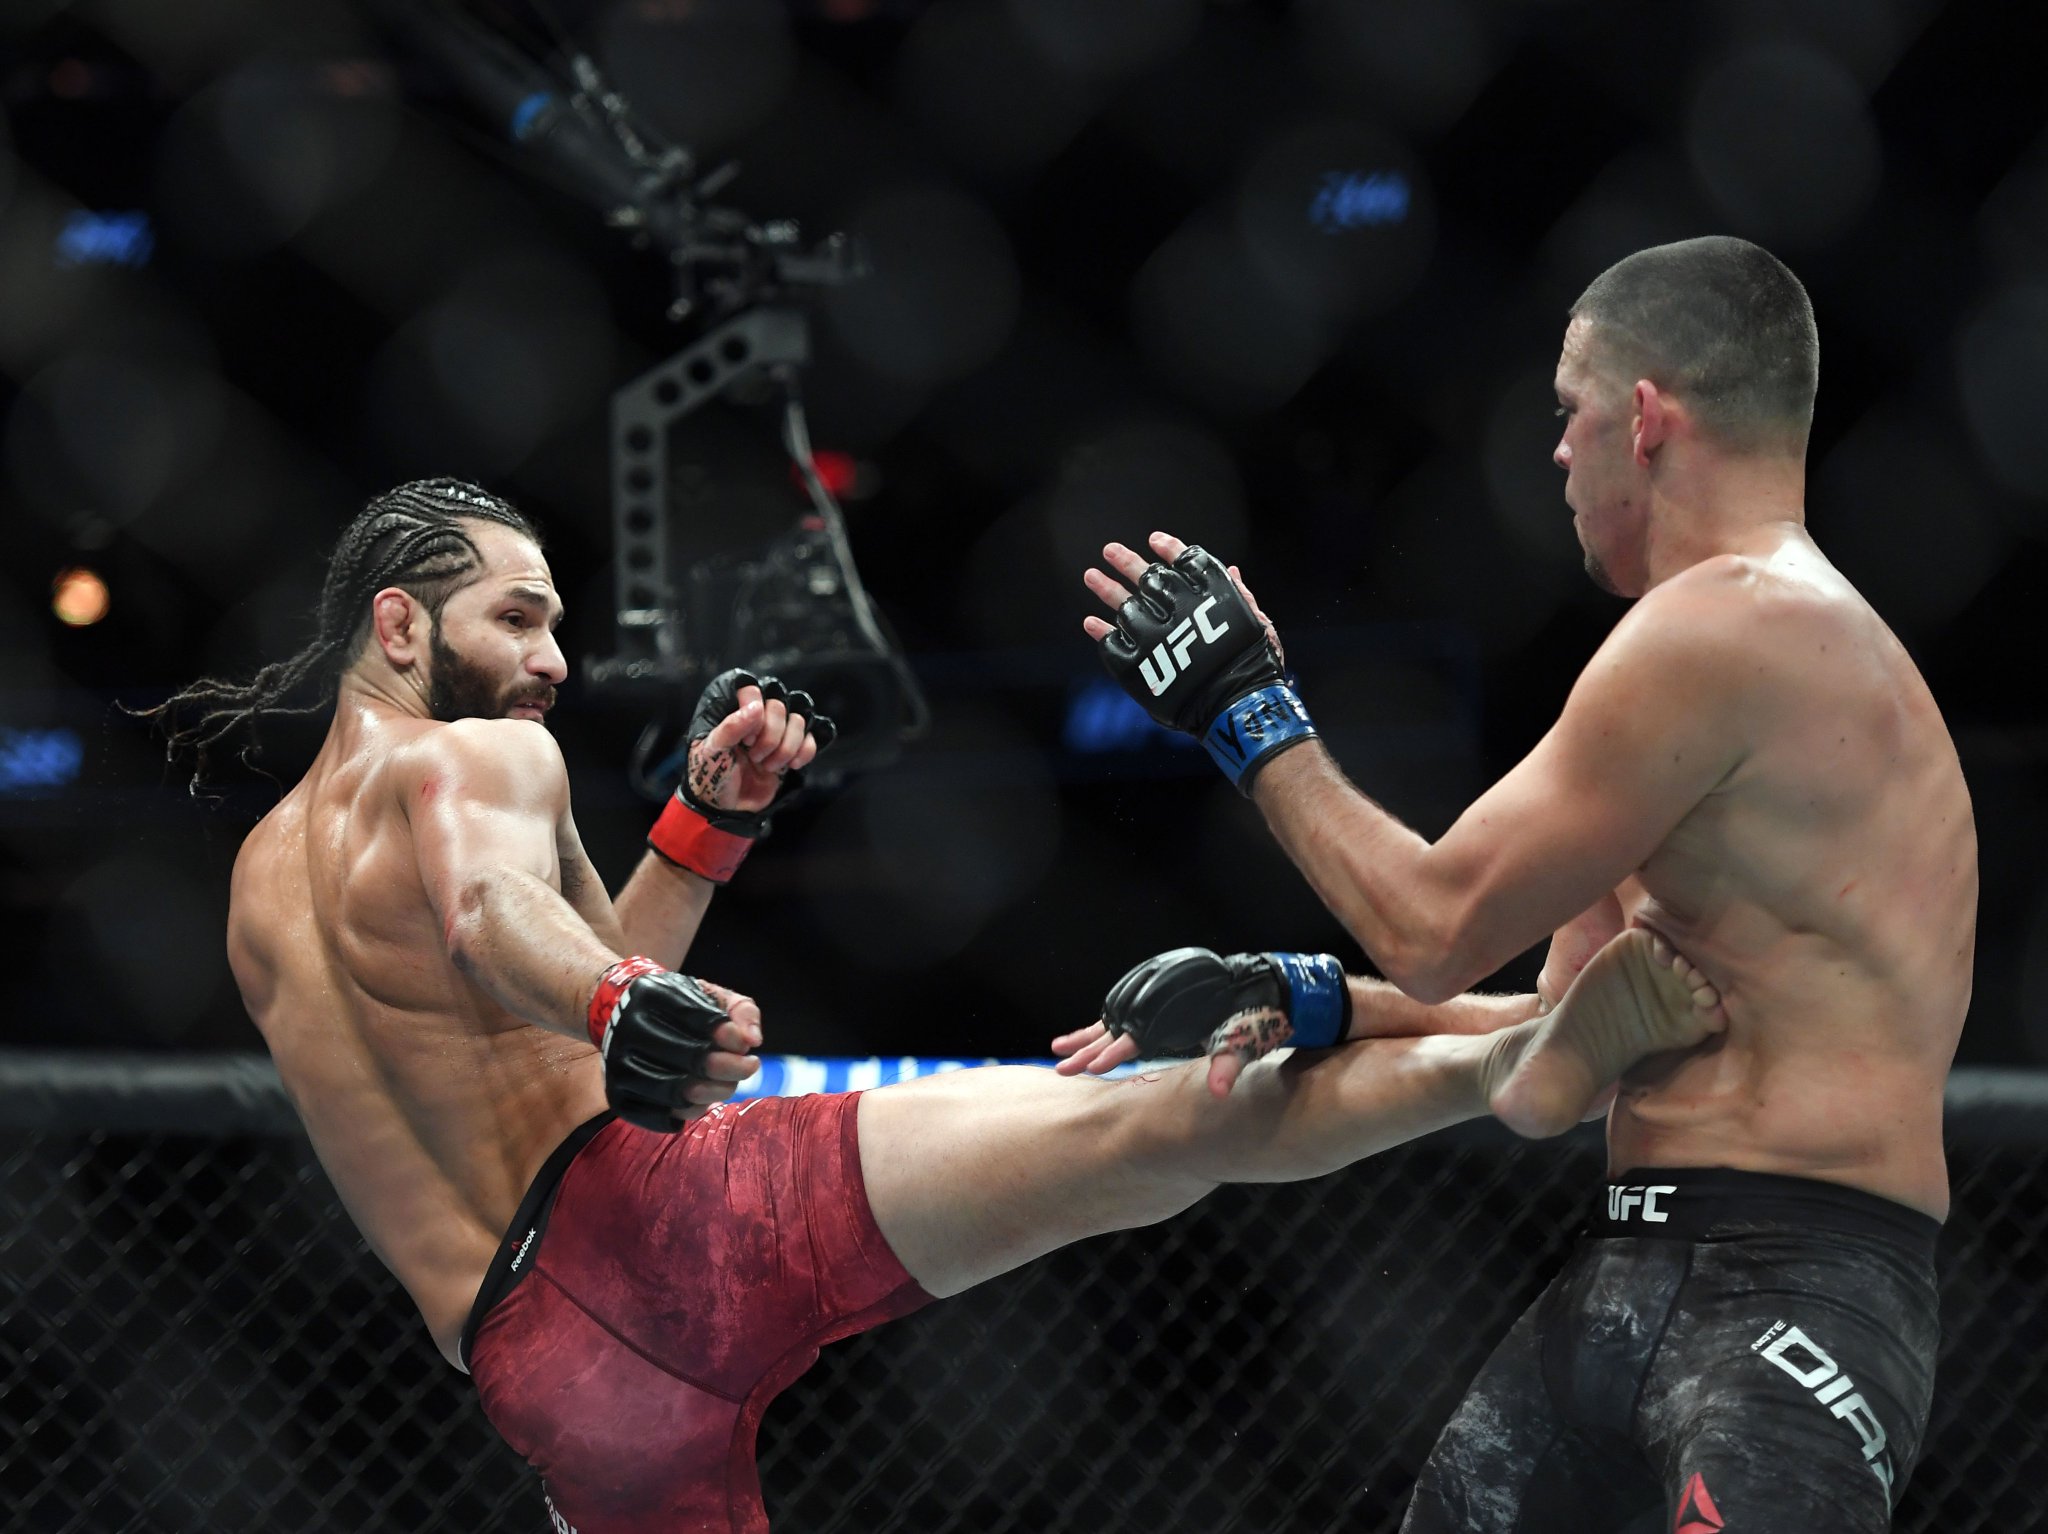 “UFC’s BMF Champion (@GamebredFighter) Says Promotion is “Just a Big Factor...